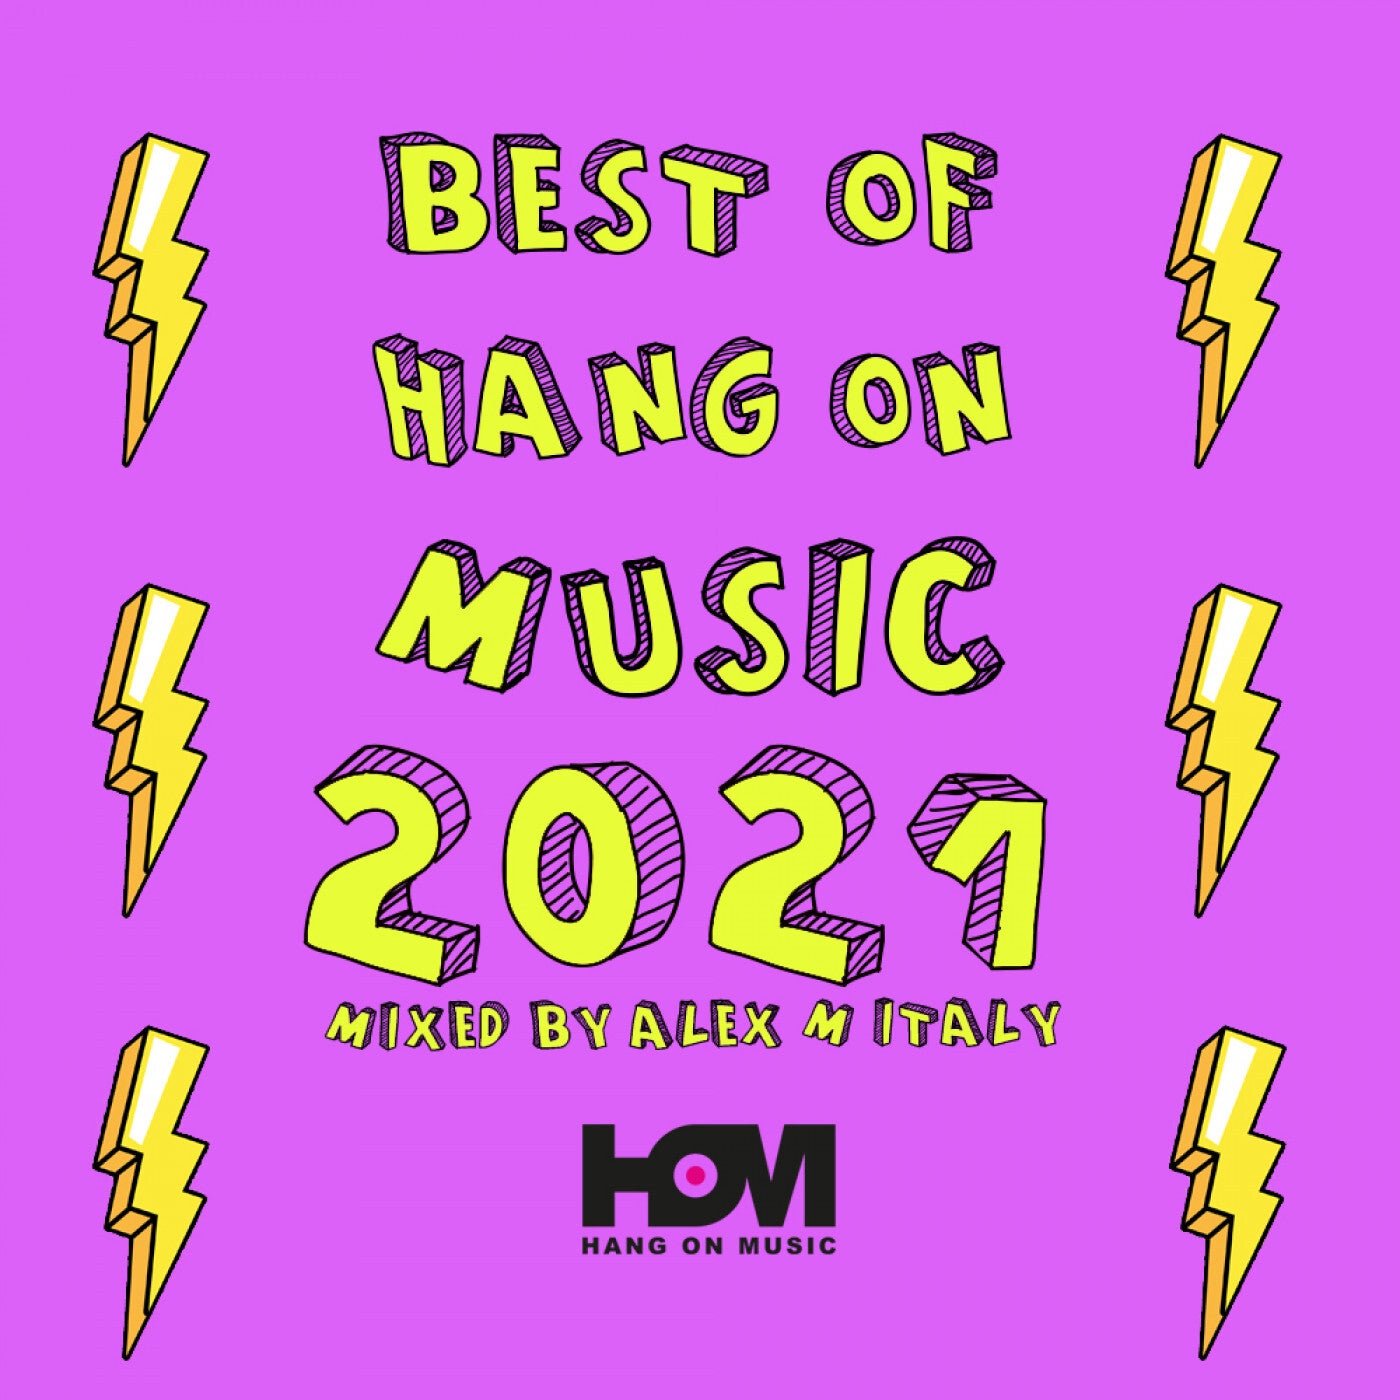 Best Of Hang On Music 2021 Mixed By Alex M (Italy)